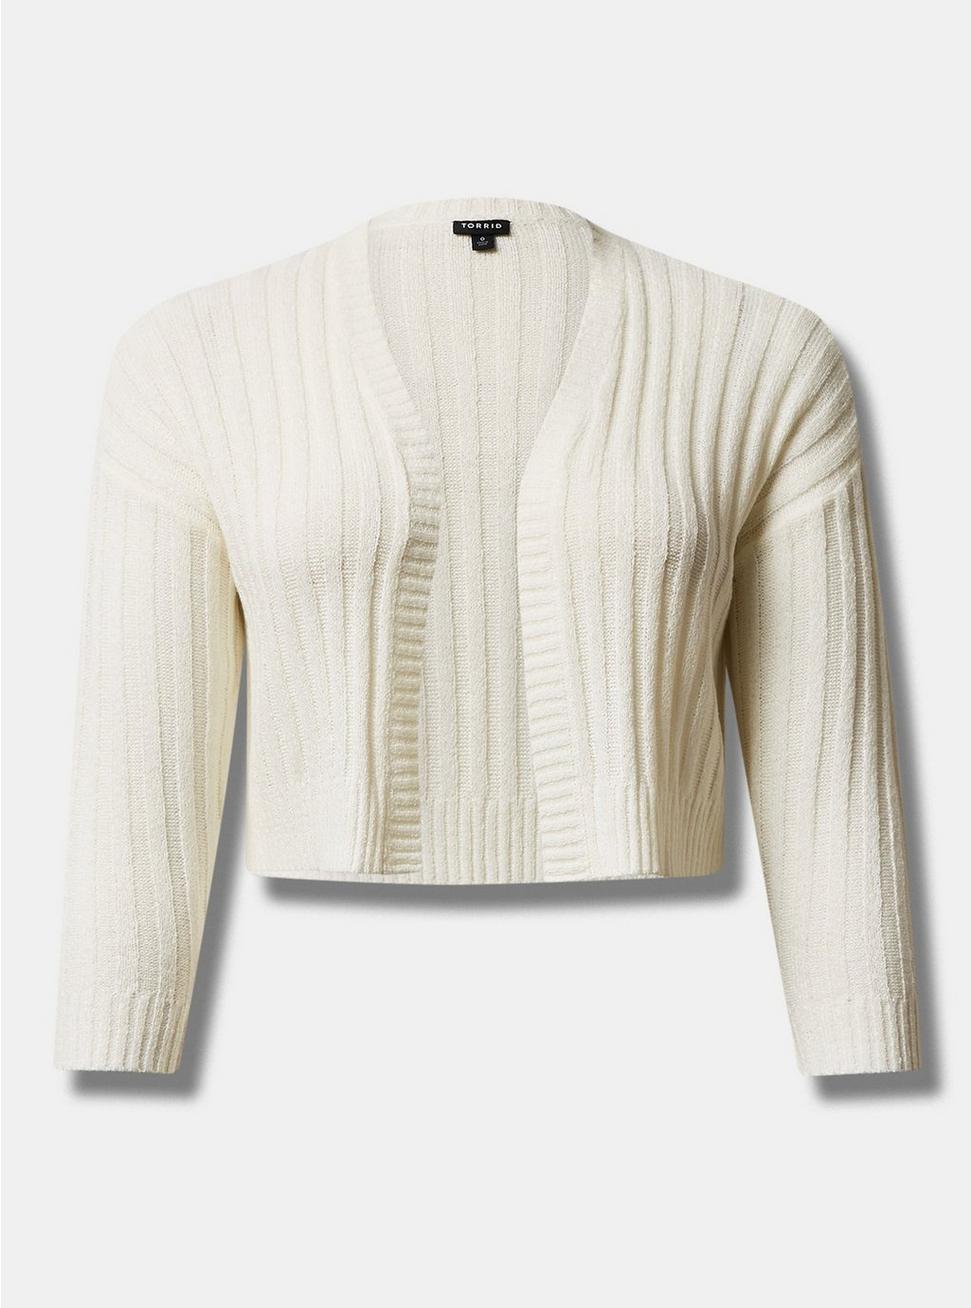 Cropped Shrug Open Front Sweater, WHITE, hi-res